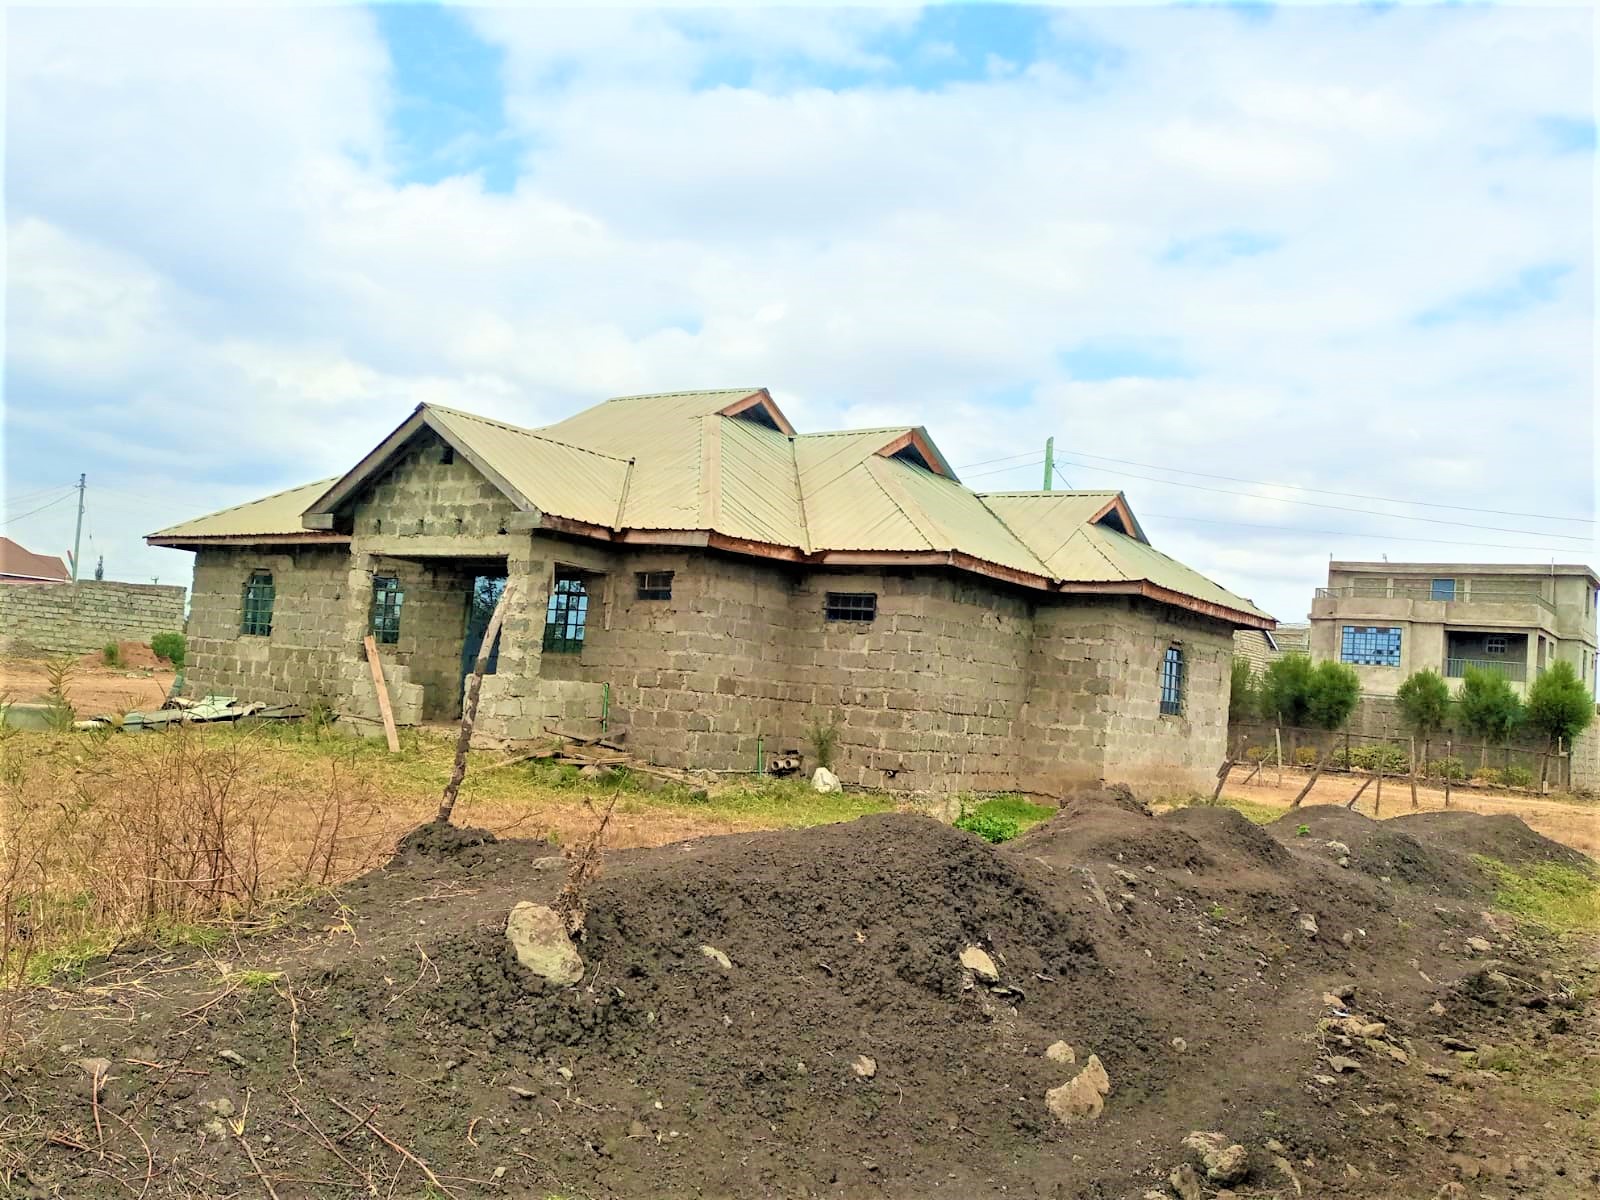 3 bedroom House Landless Thika  on Sale . 1/4 Acre 